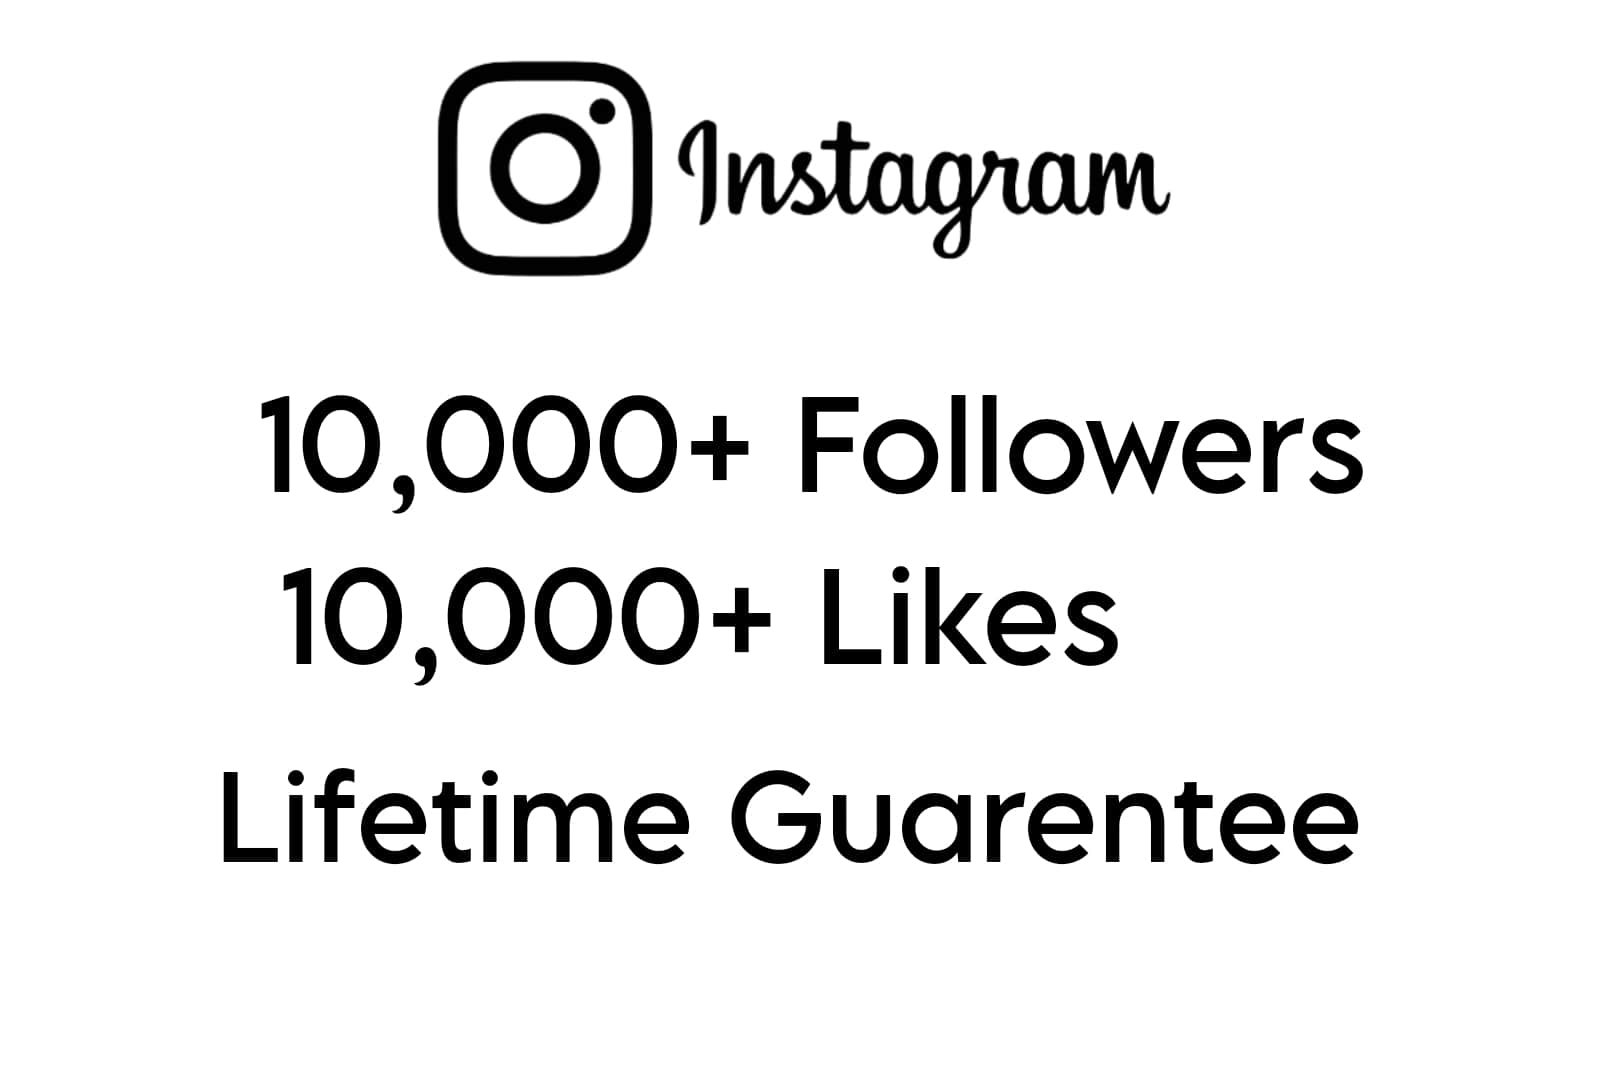 Instagram 10,000+ Followers and 10,000+ Likes, High-quality, Lifetime Guarentee.